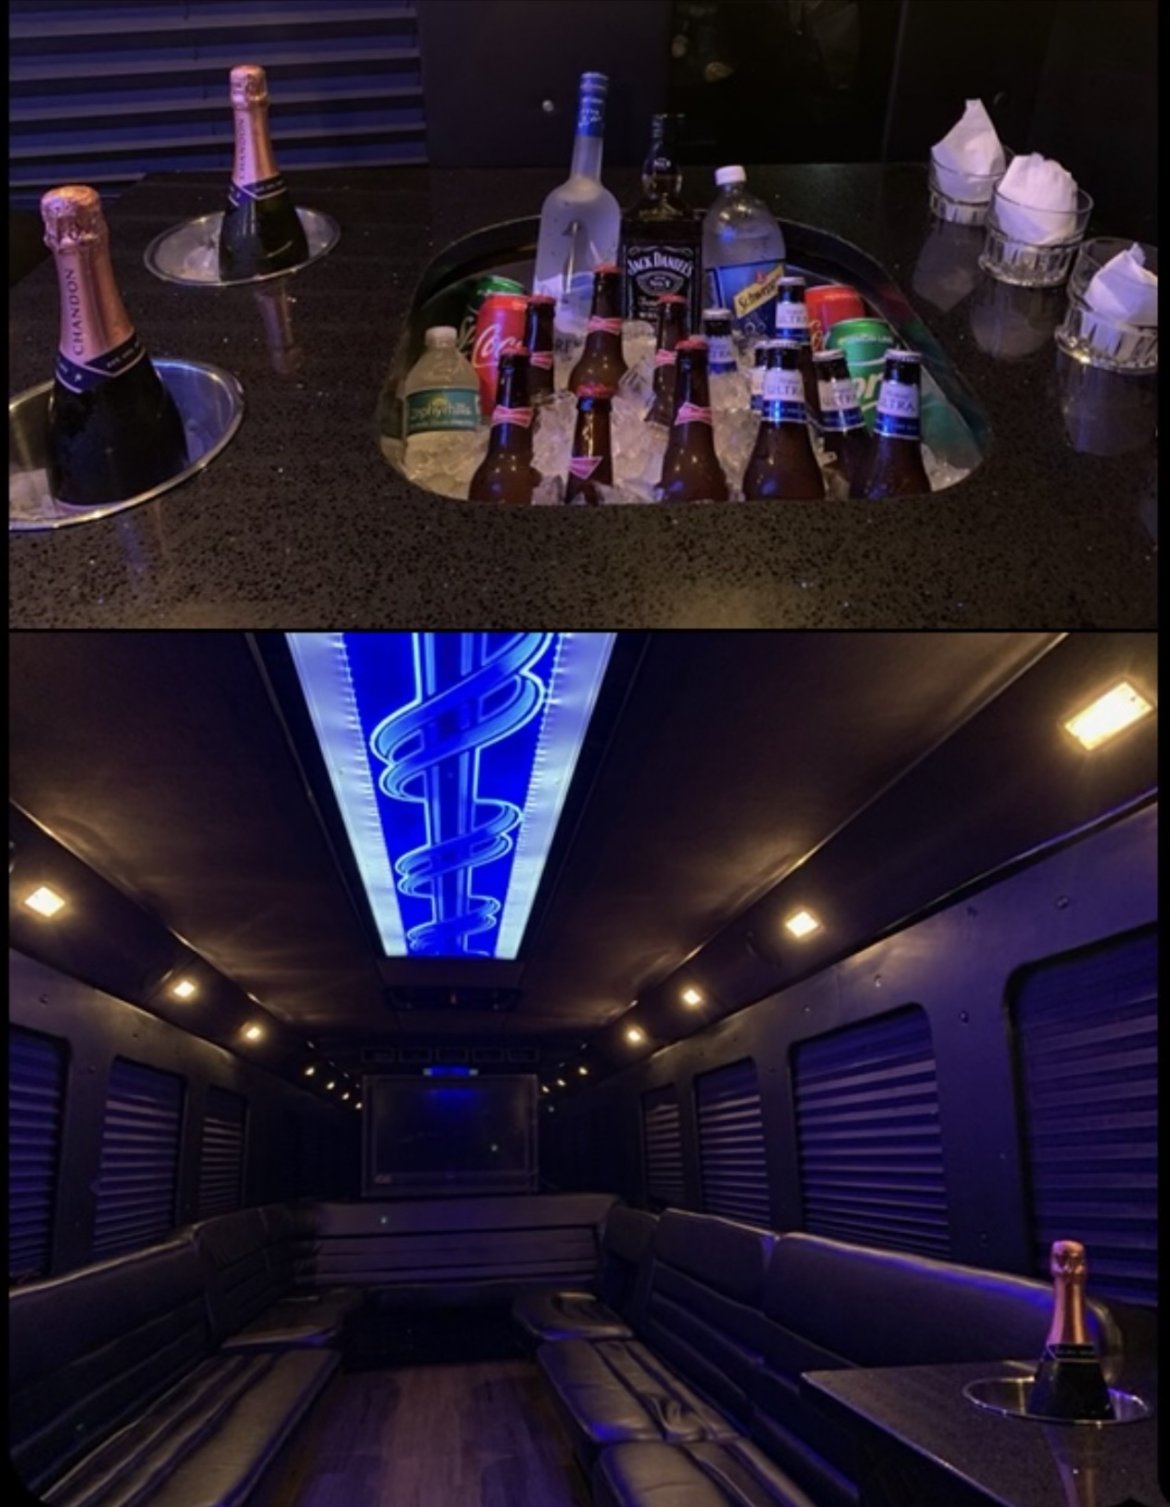 Limo Bus for sale: 2012 Ford 550 power stroke by LGE